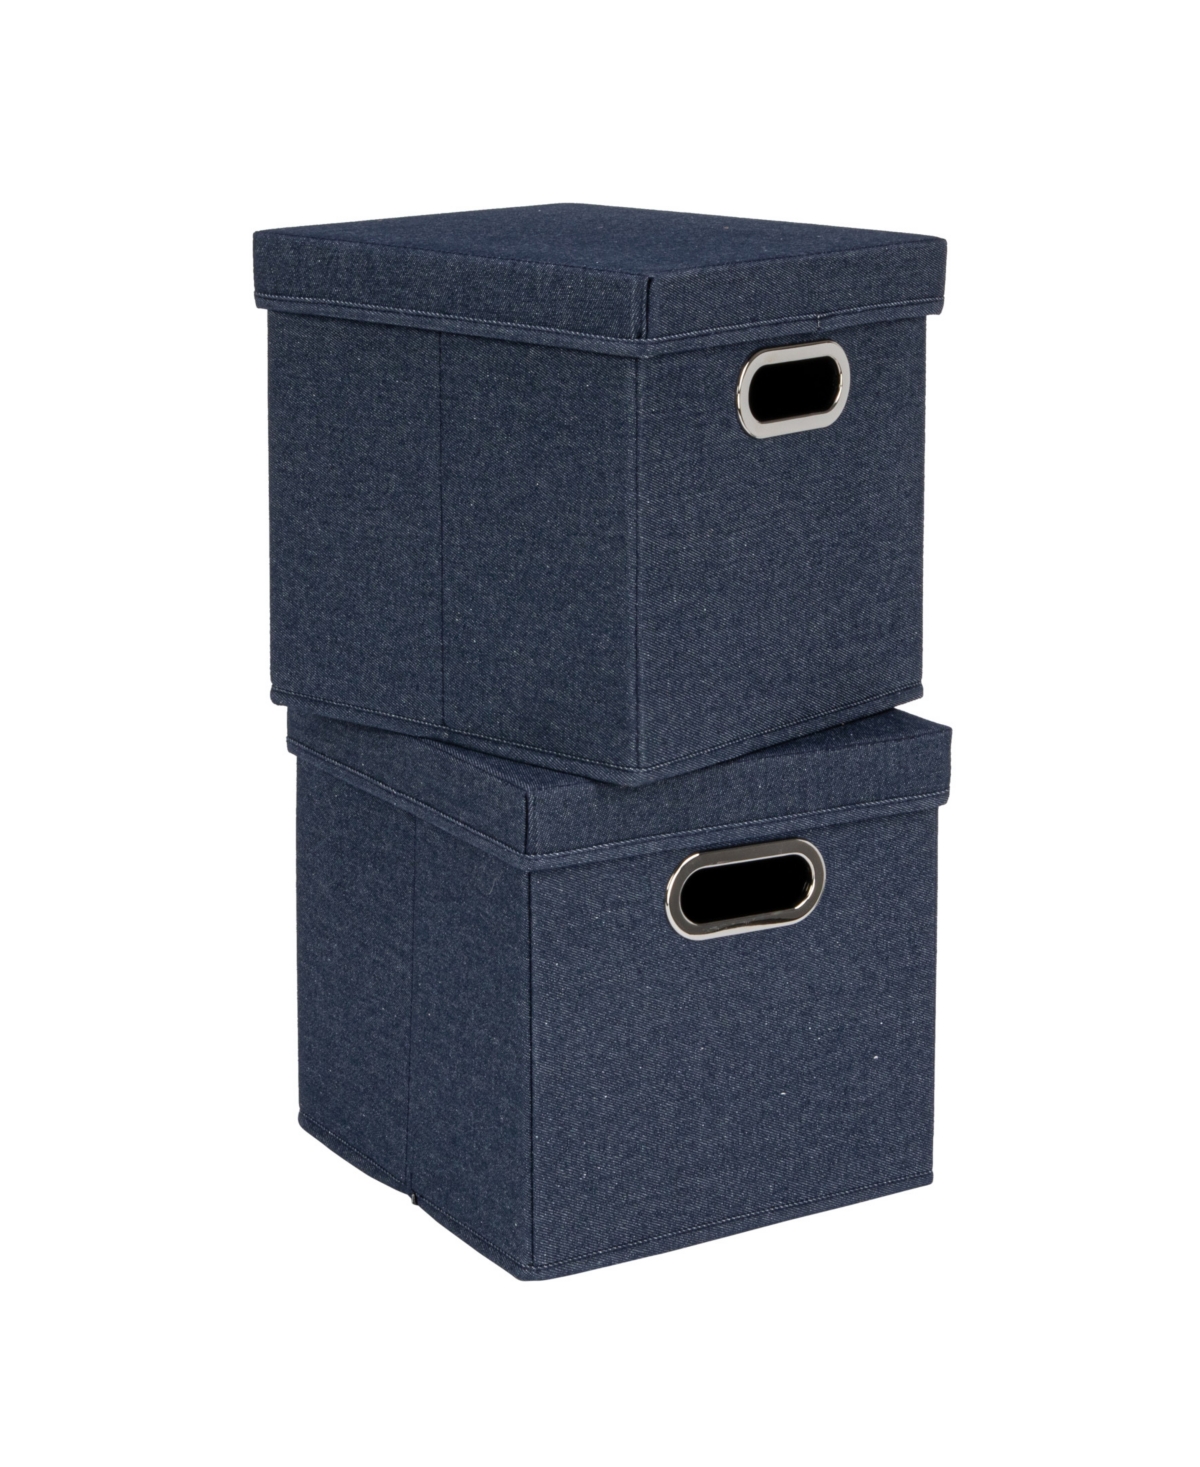 Household Essentials Collapsible Cotton Blend Cube Storage Box With Lid And Metal Grommet Handle, Set Of 2 In Blue